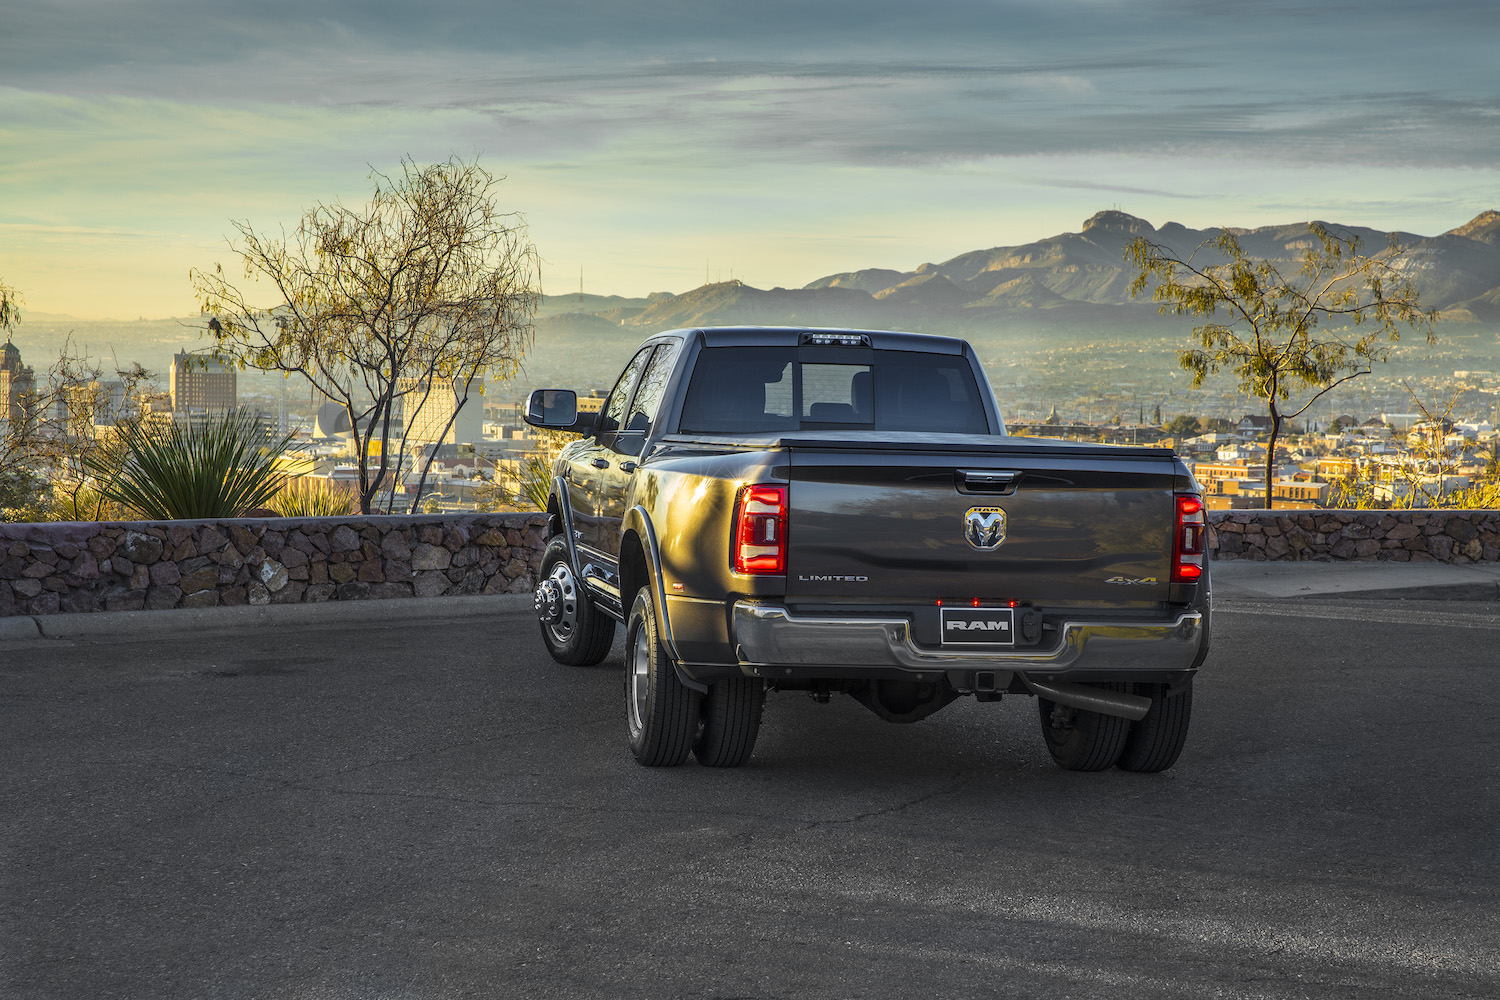 Promo photo of a Ram 3500 pickup truck in a parking lot, a city skyline bellow. 